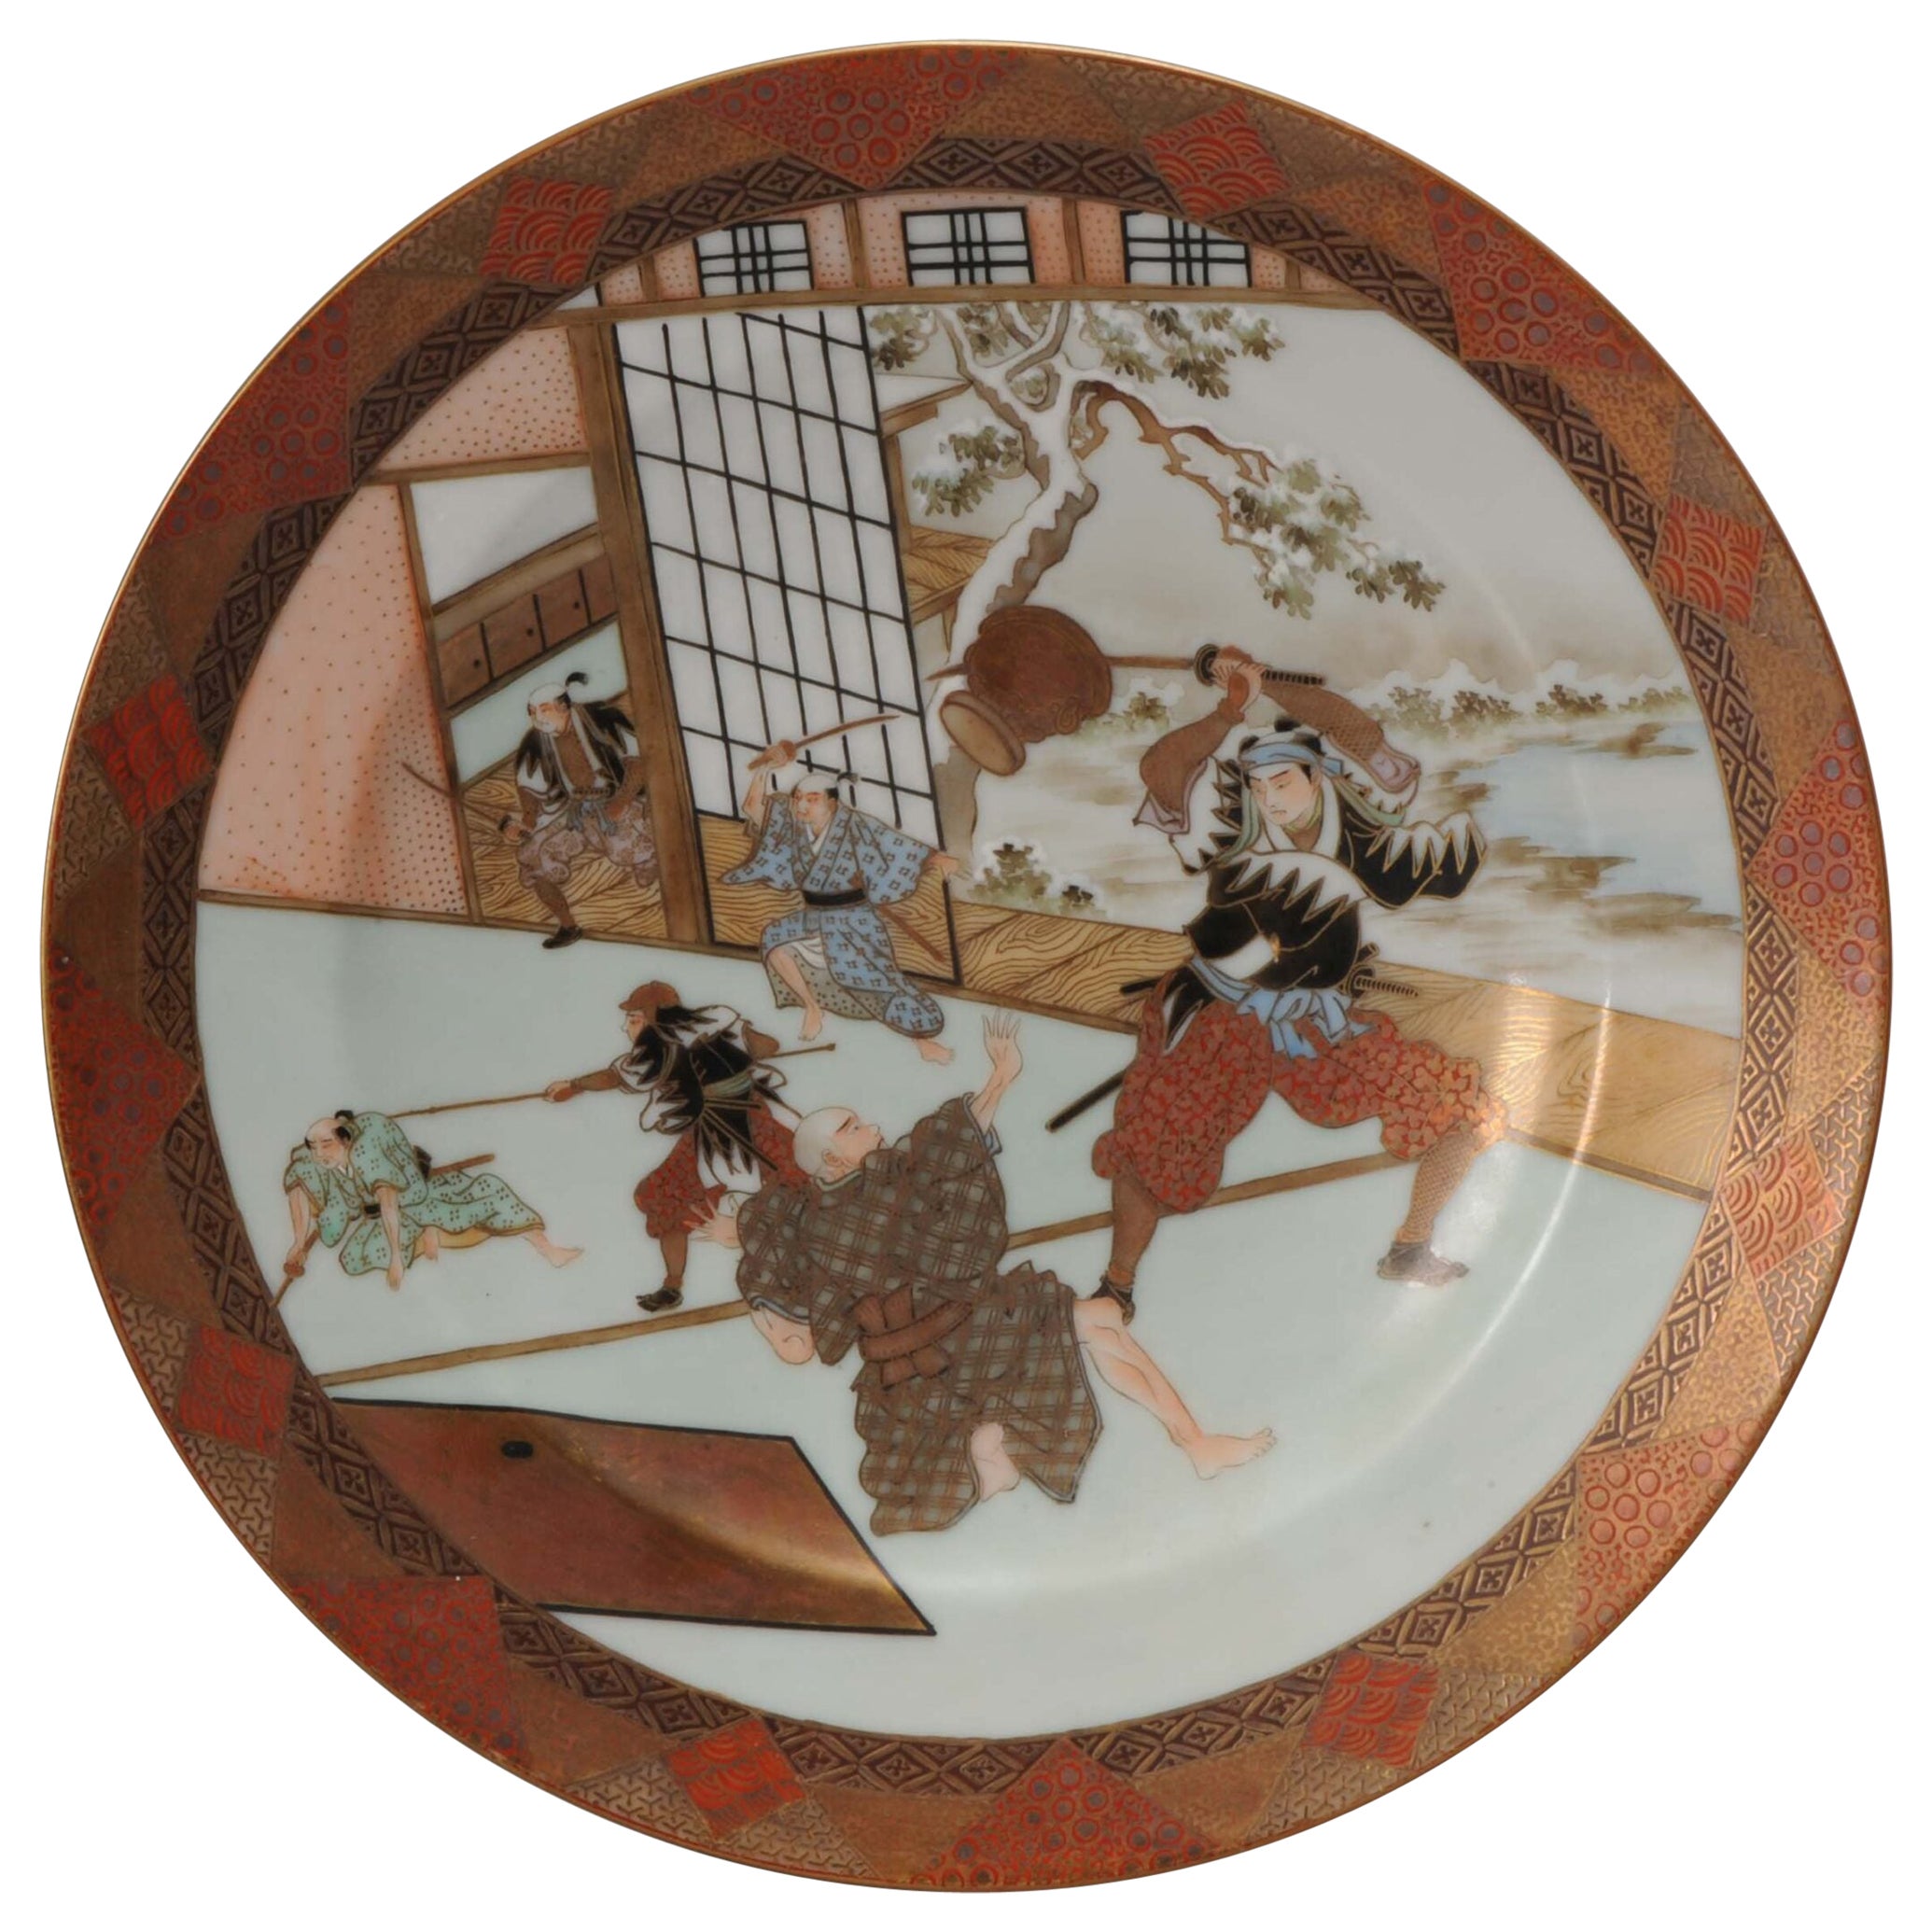 Top Quality Antique Japanese Porcelain Dish with Warrior Scene Japan Marked Base